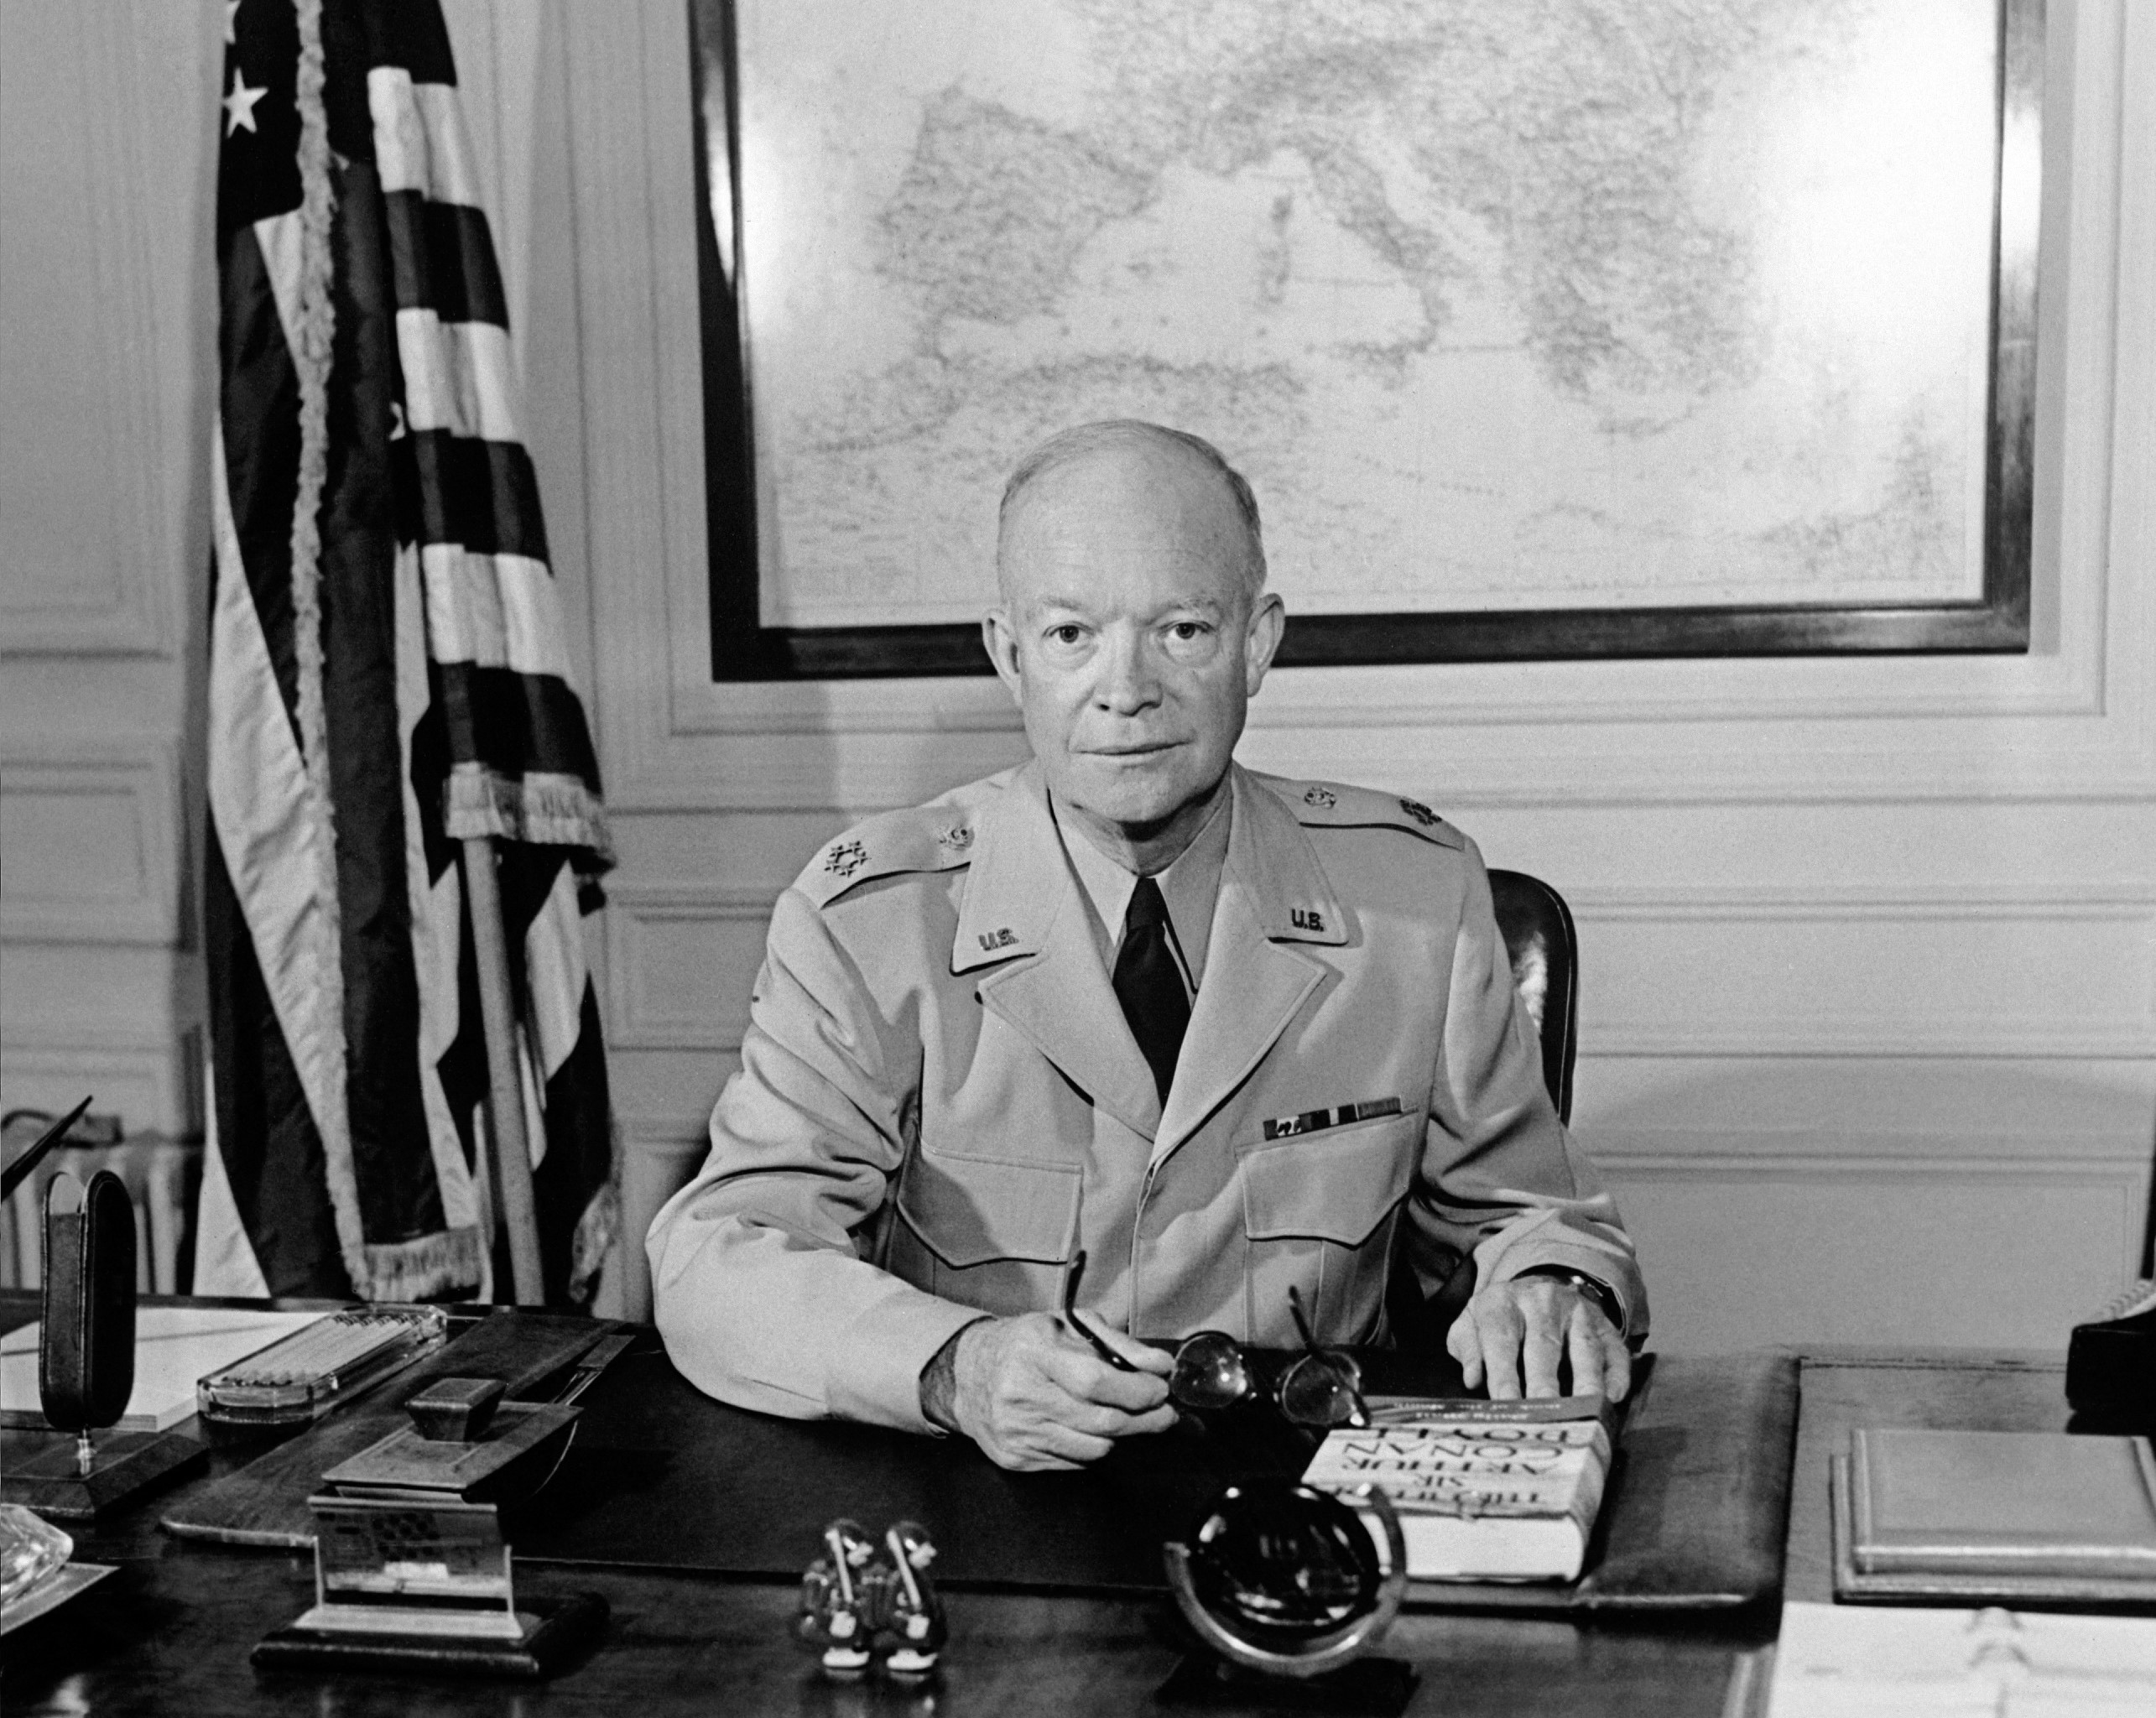 US President General Dwight David "Ike" Eisenhower (1890-1969) poses for a photographer in 1951 at NATO Paris headquarters. In 1950